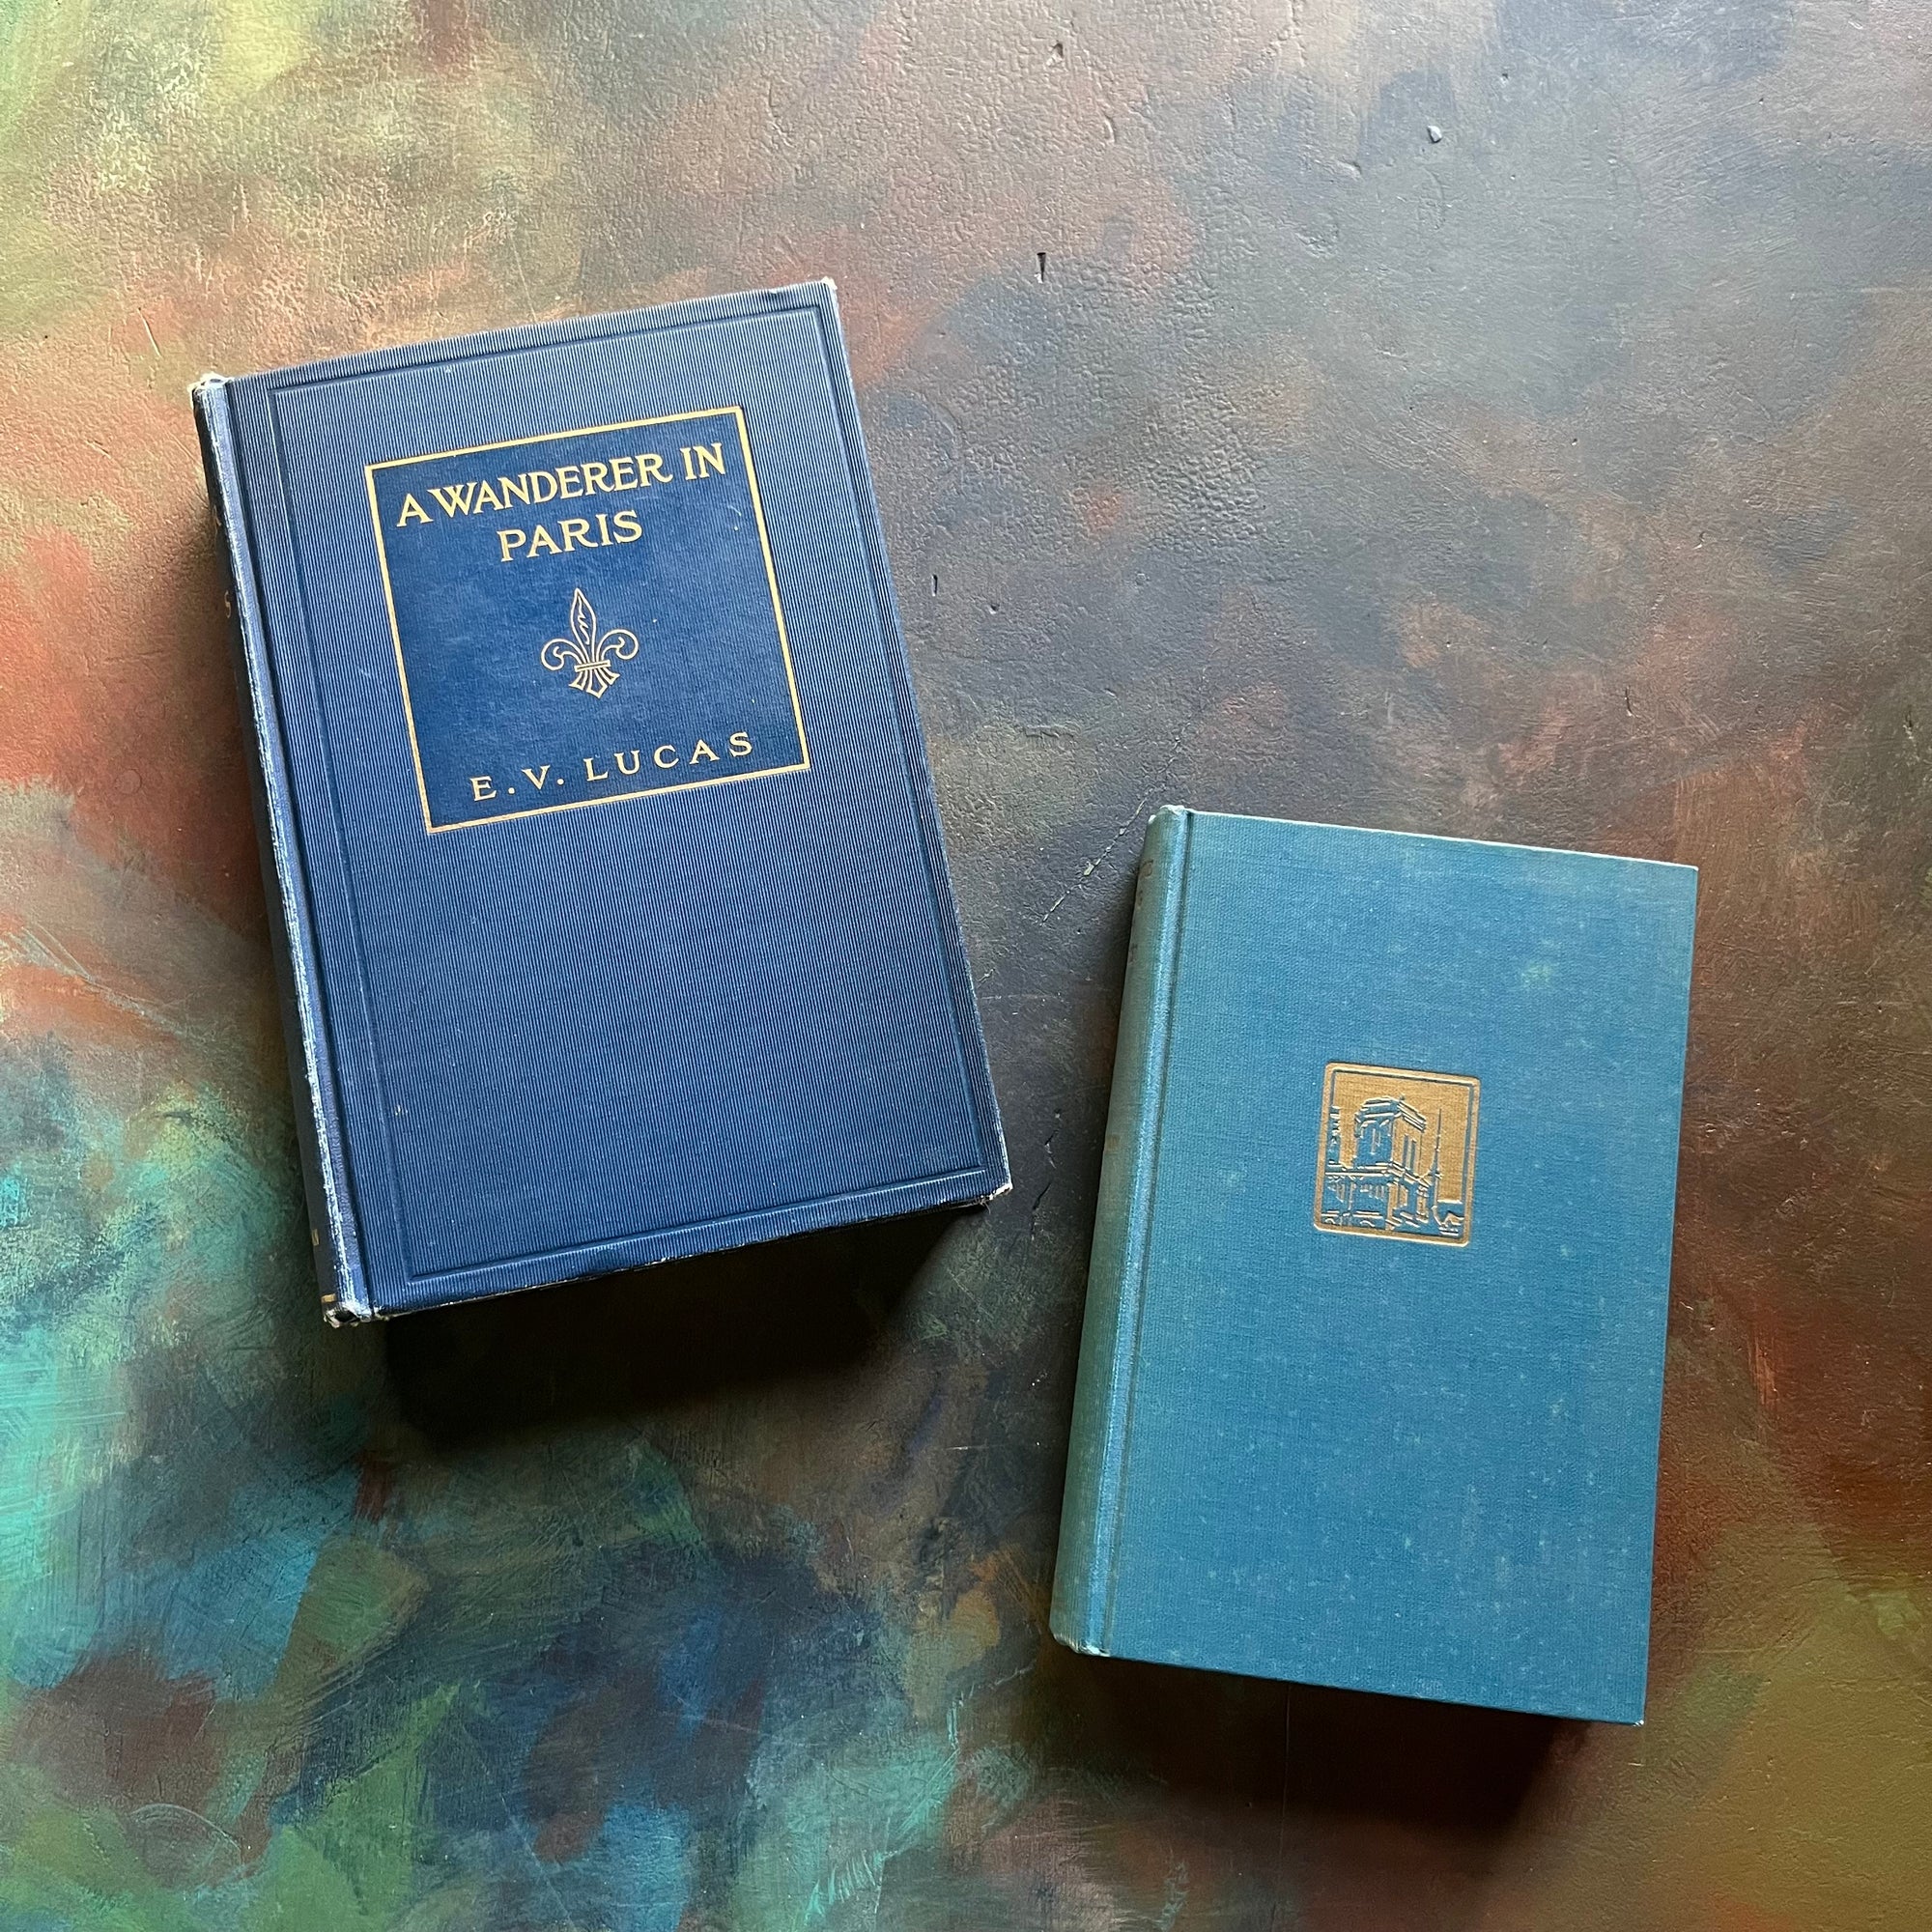 Pair of Vintage Books About Traveling in Paris-So You're Going to Paris & A Wanderer in Paris-vintage travel books-Paris, France-view of the front covers - embossed